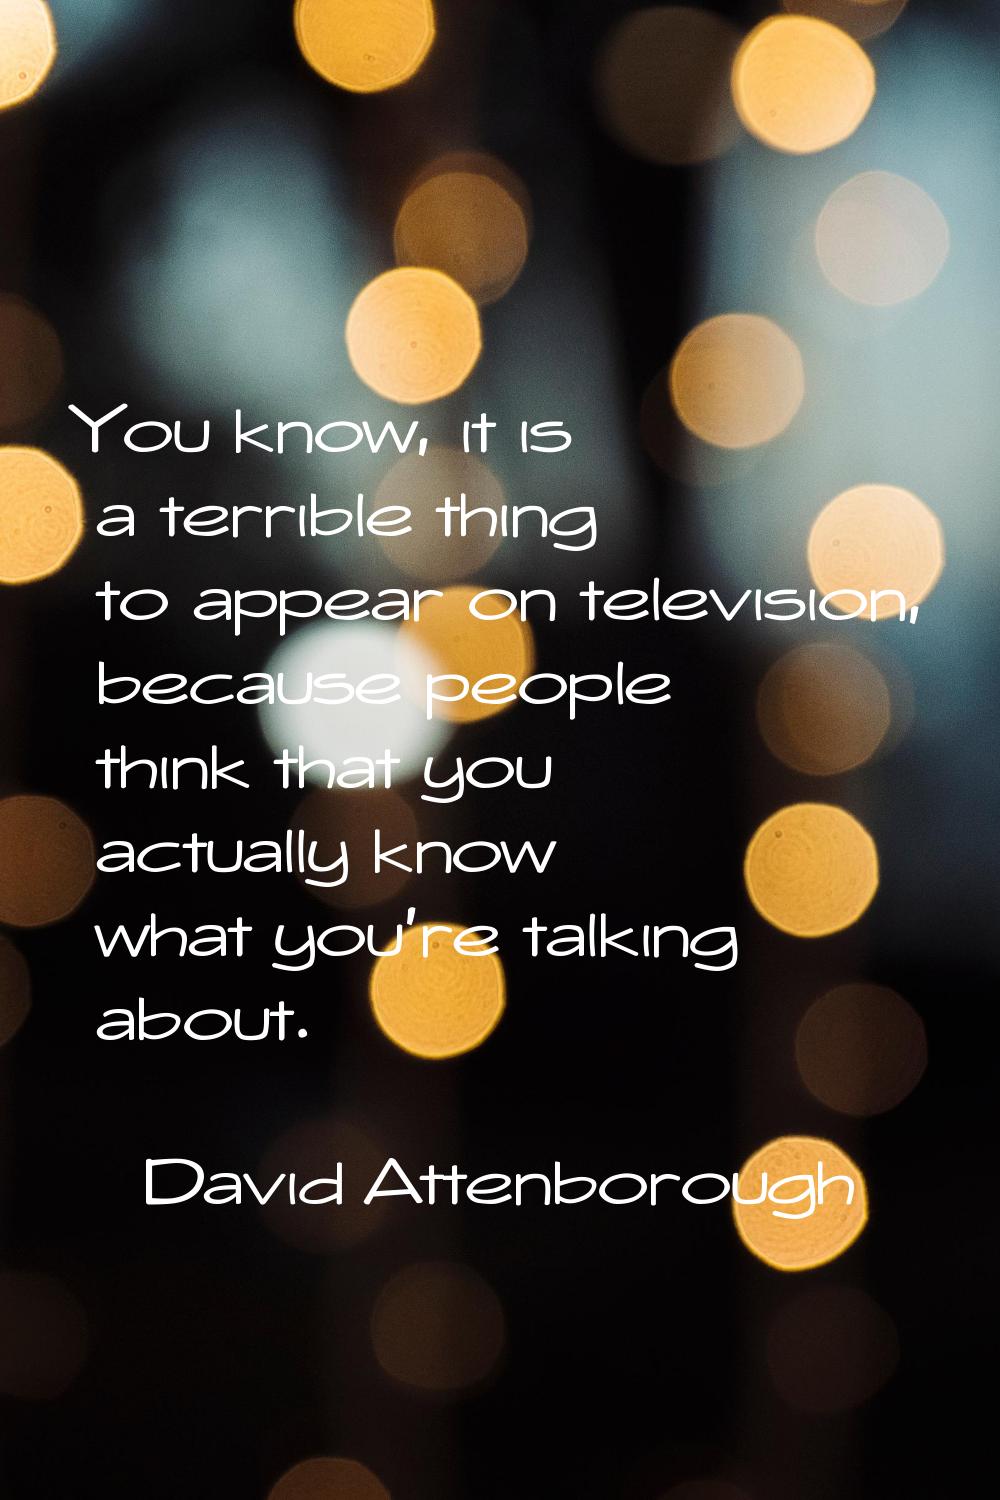 You know, it is a terrible thing to appear on television, because people think that you actually kn